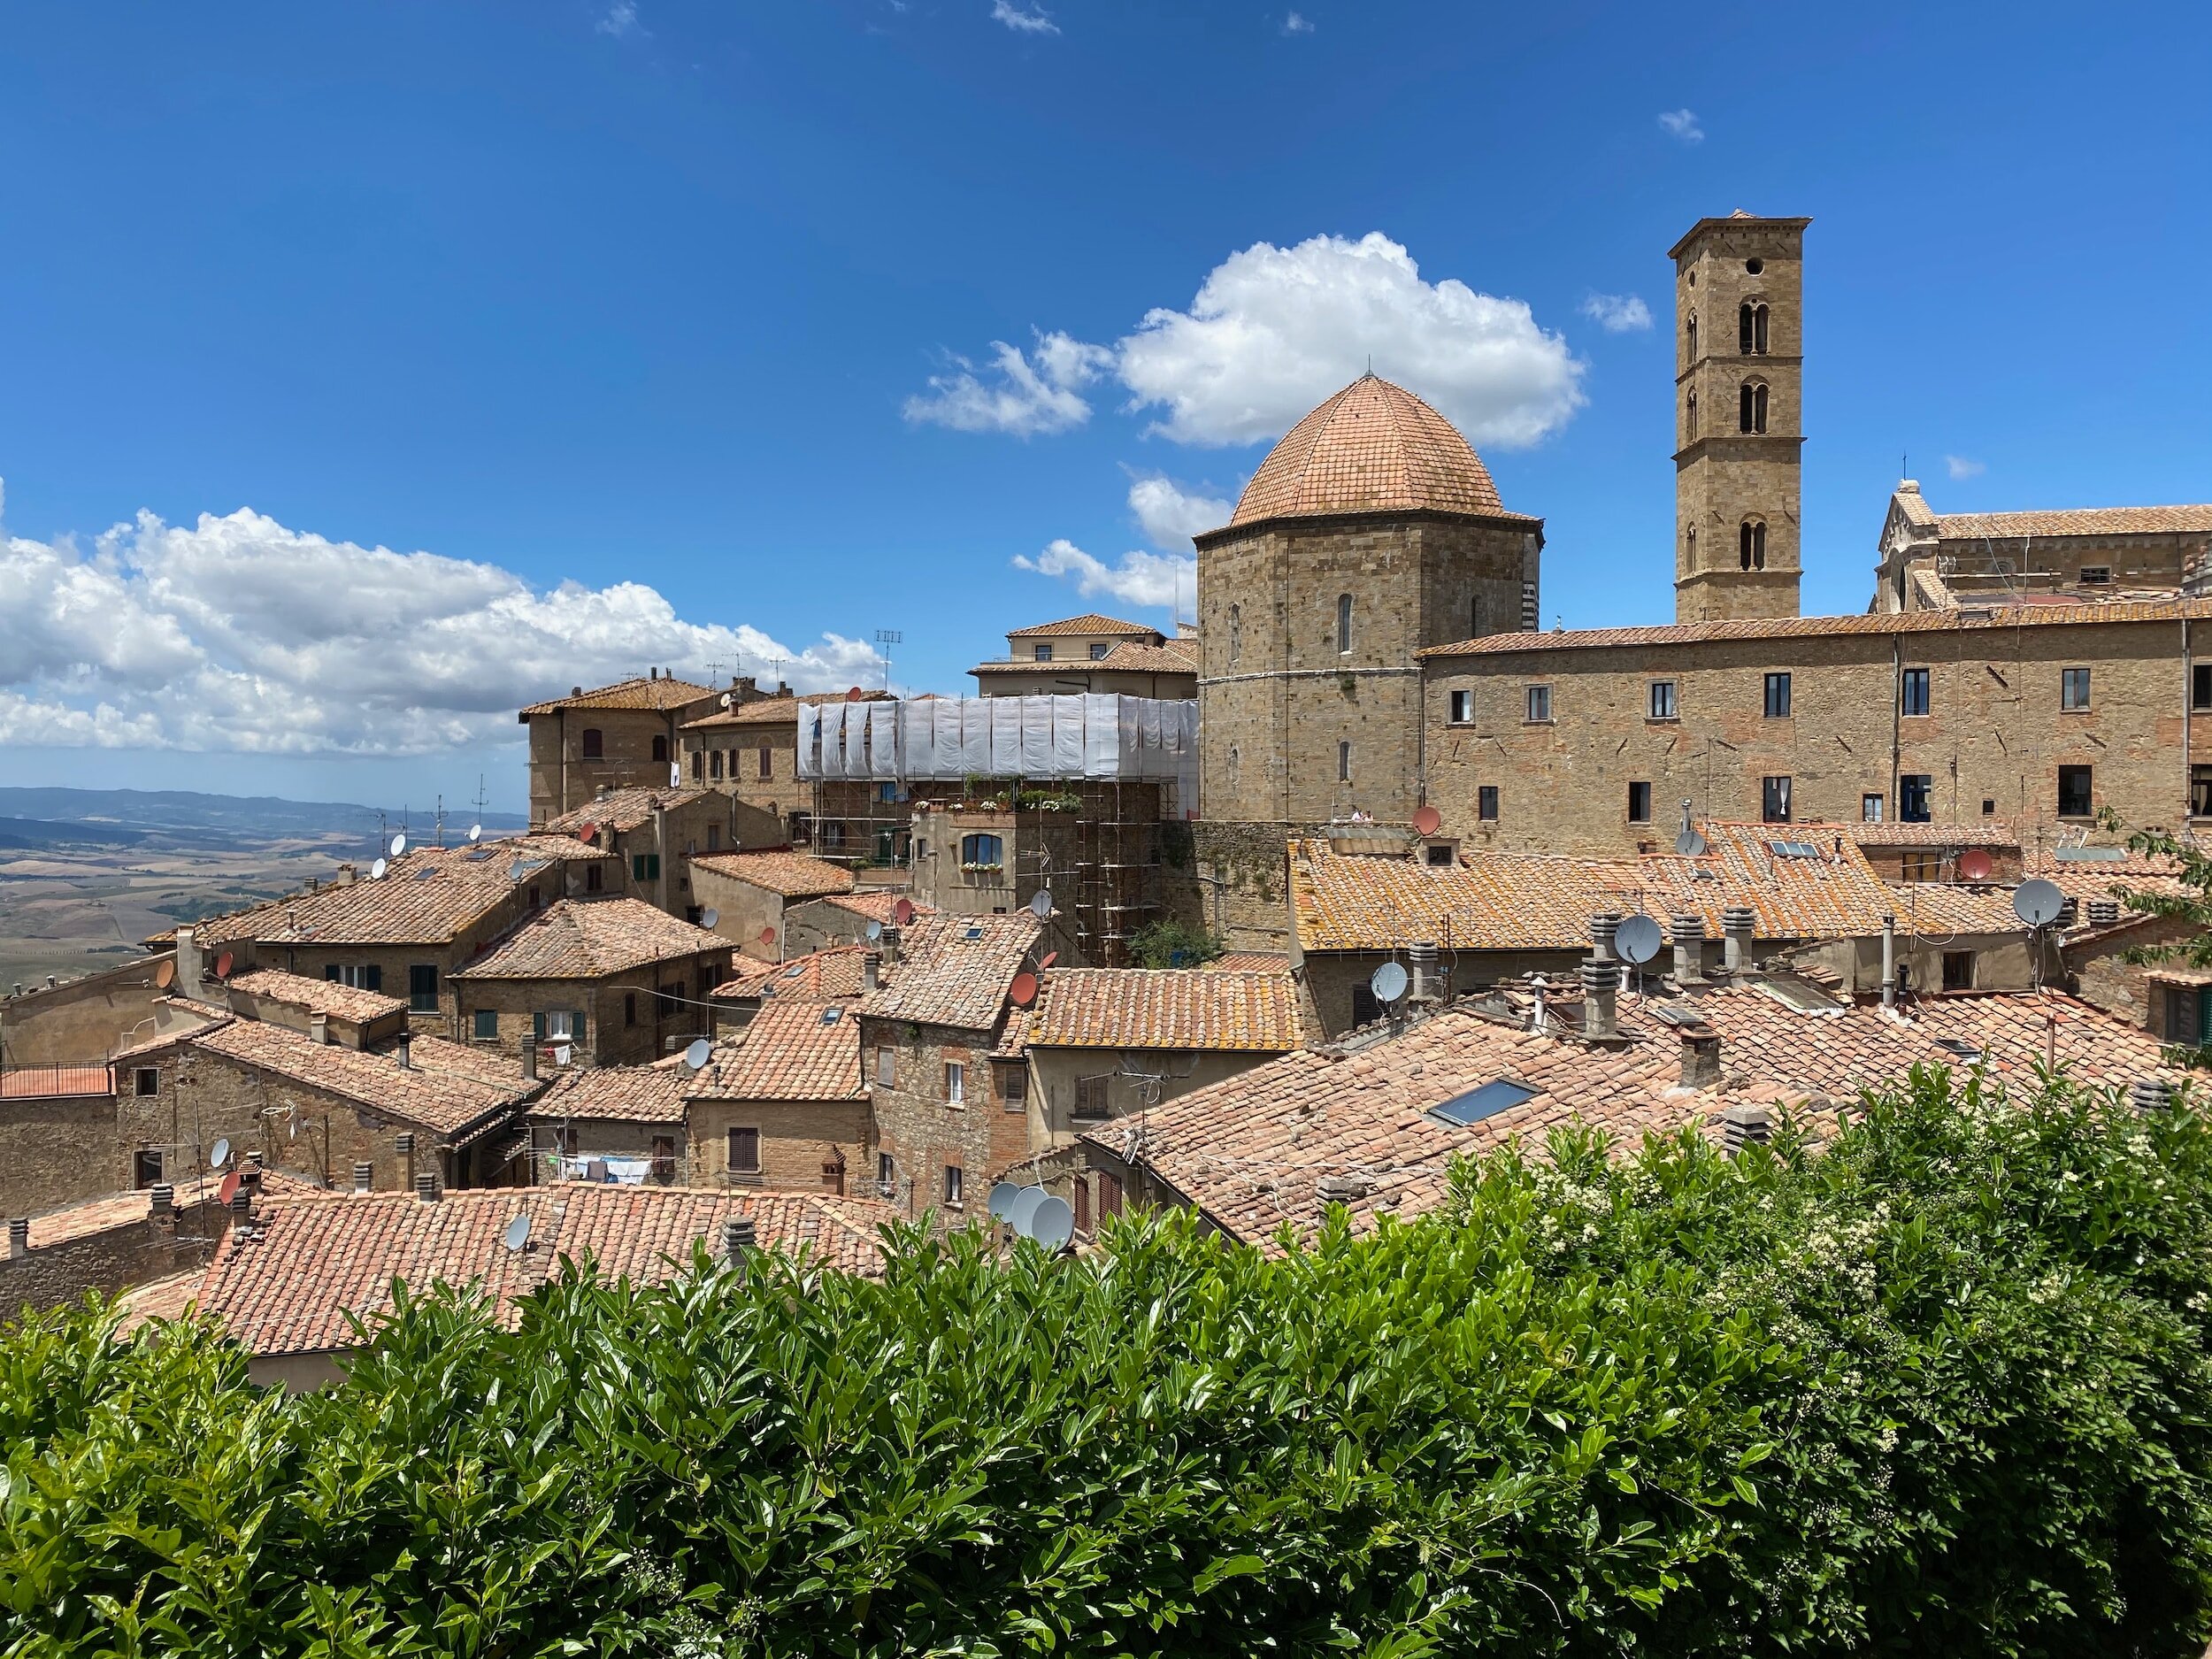 Looking out over stone buildings and their red roofs in the town of Volterra in Tuscany